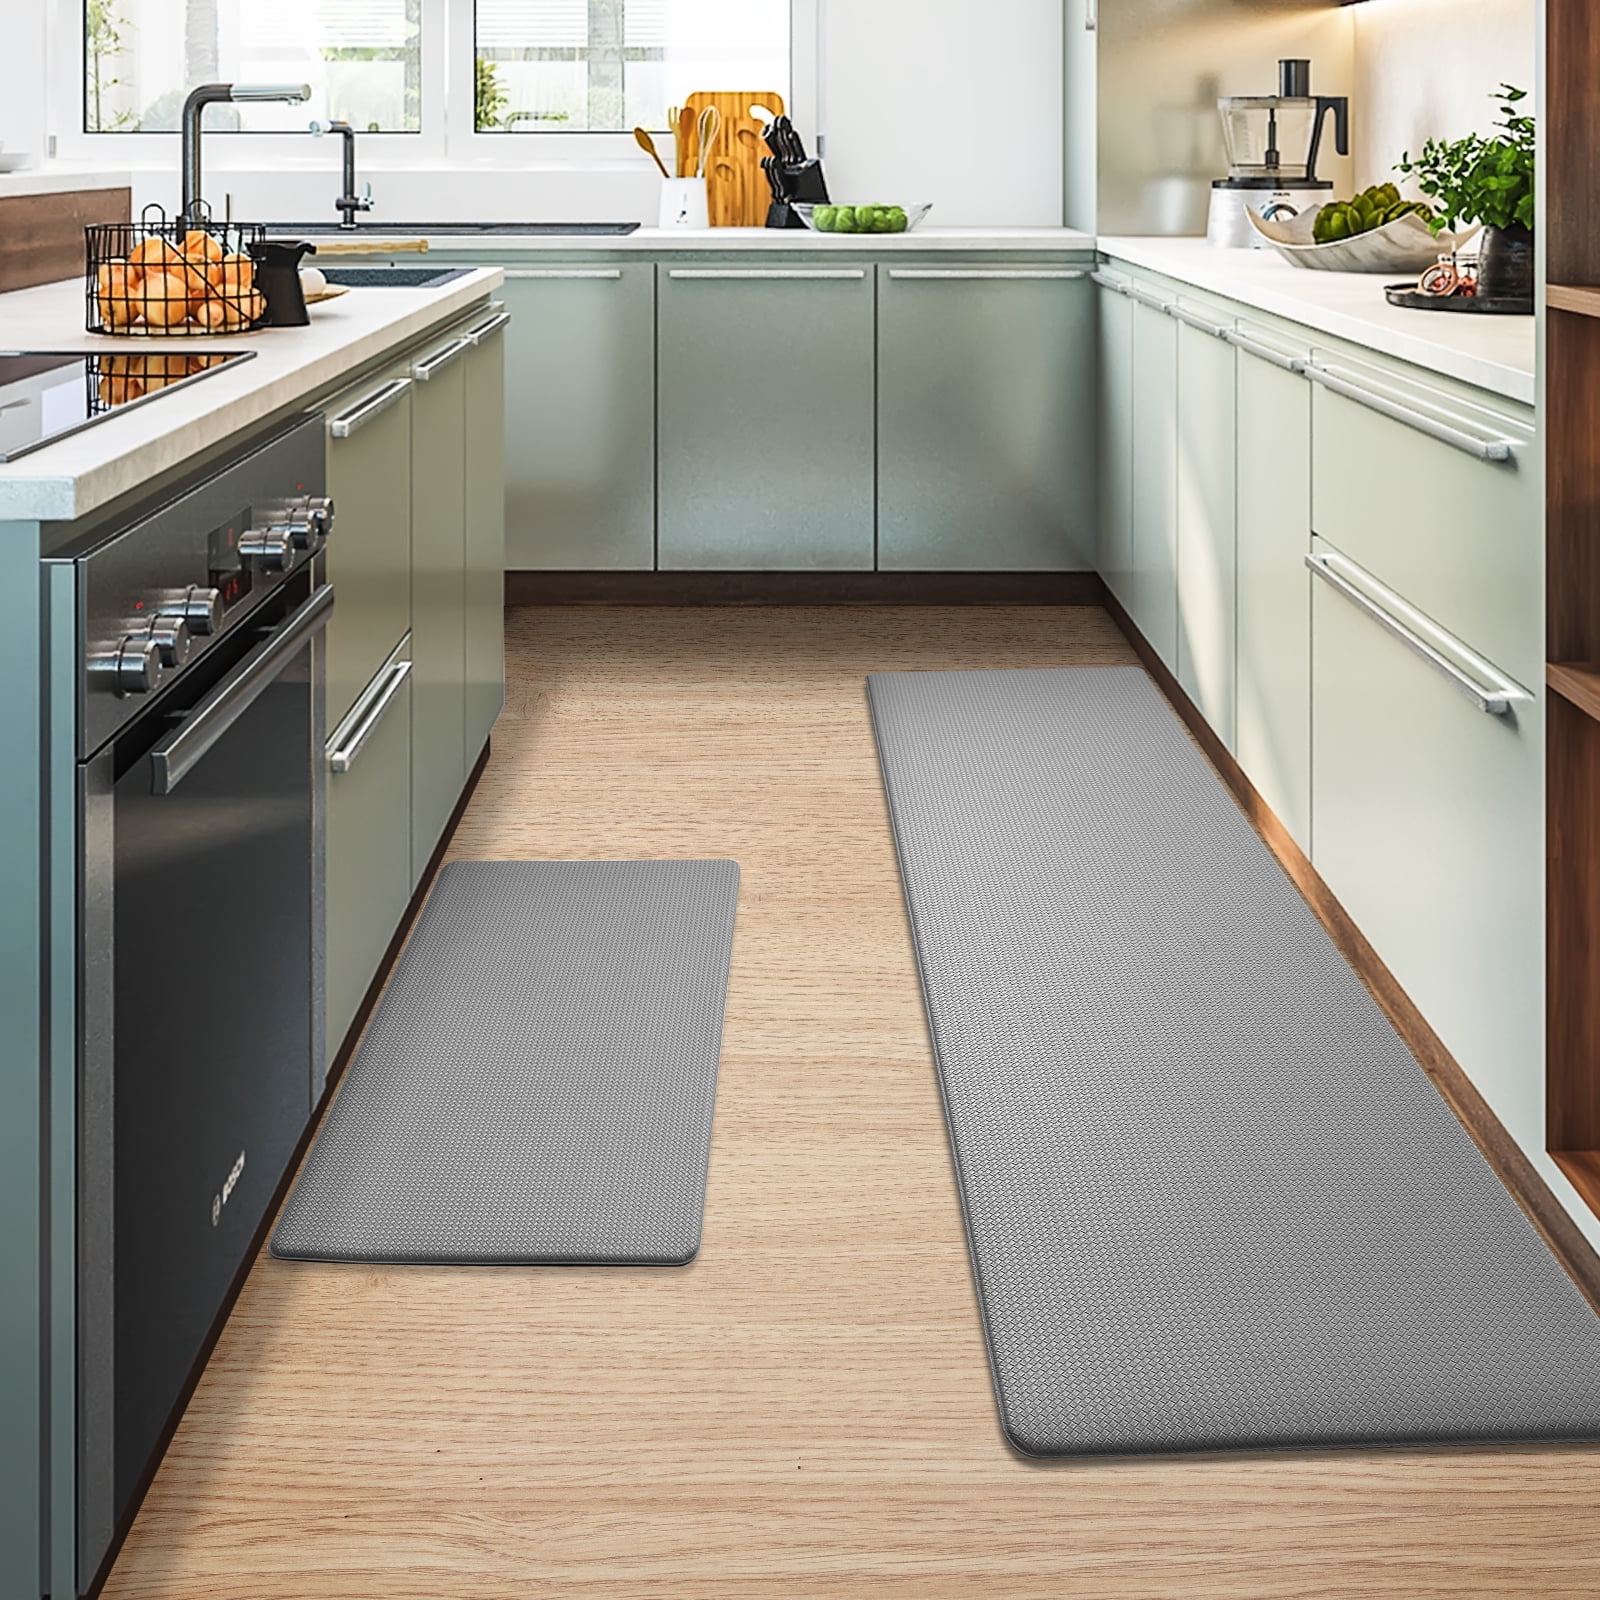 HOMEIDEAS Kitchen Mat Set 2 Piece, Cushioned Anti Fatigue Kitchen Floor  Rugs Sets and Runner, Non Skid Standing Comfort Mat, Stain Resistant